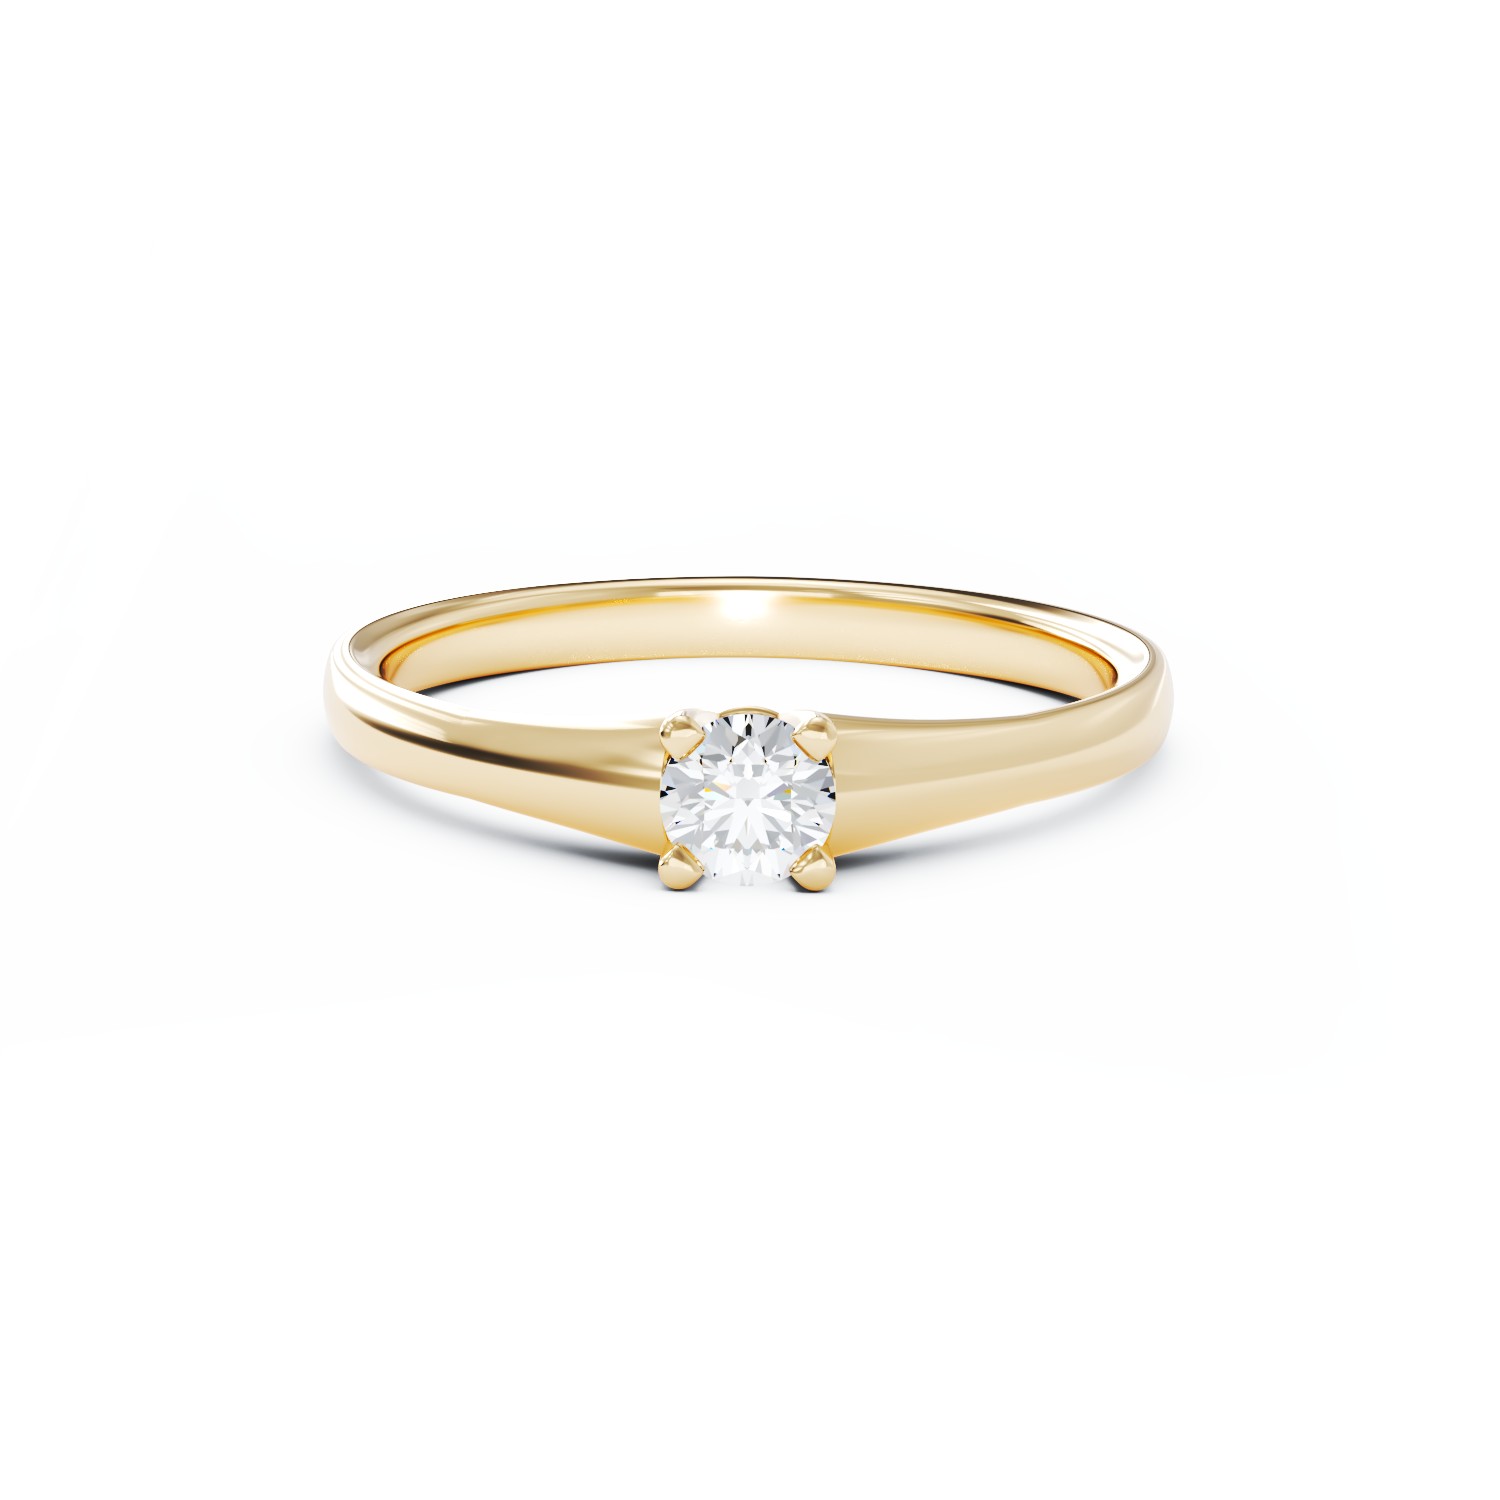 Yellow gold engagement ring with 0.1ct solitaire diamond